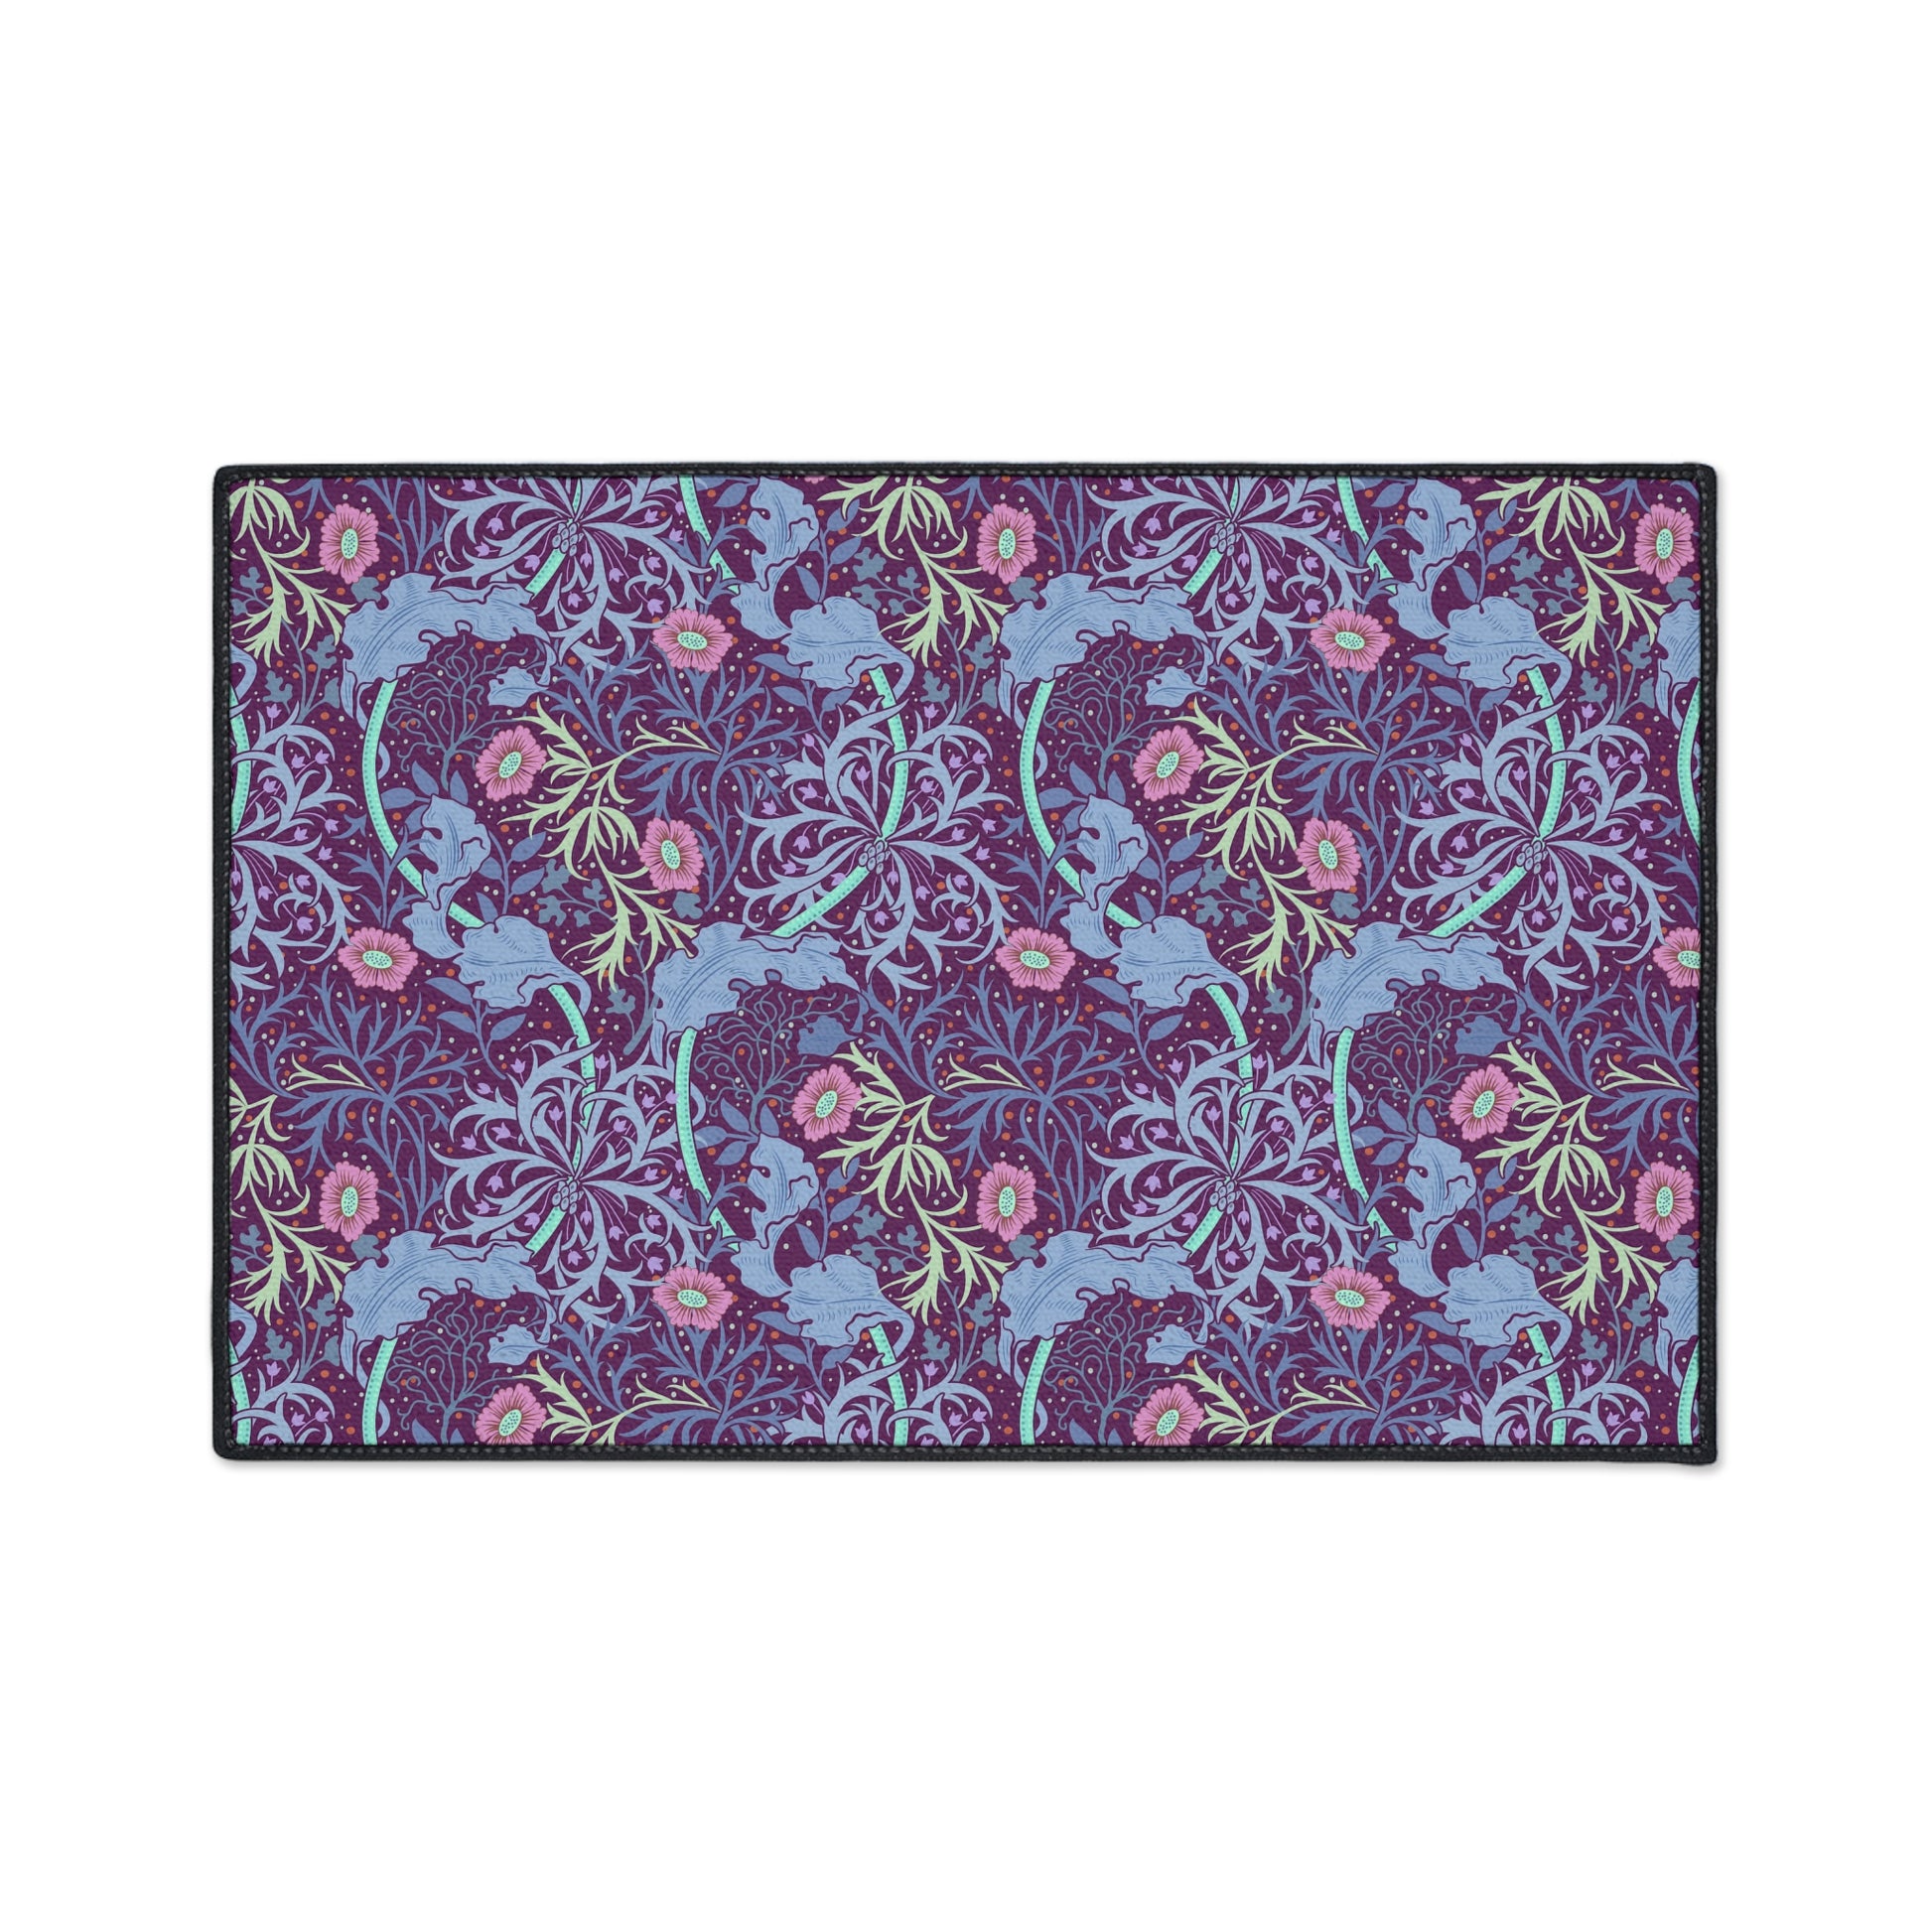 william-morris-co-heavy-duty-floor-mat-seaweed-collection-pink-flowers-6